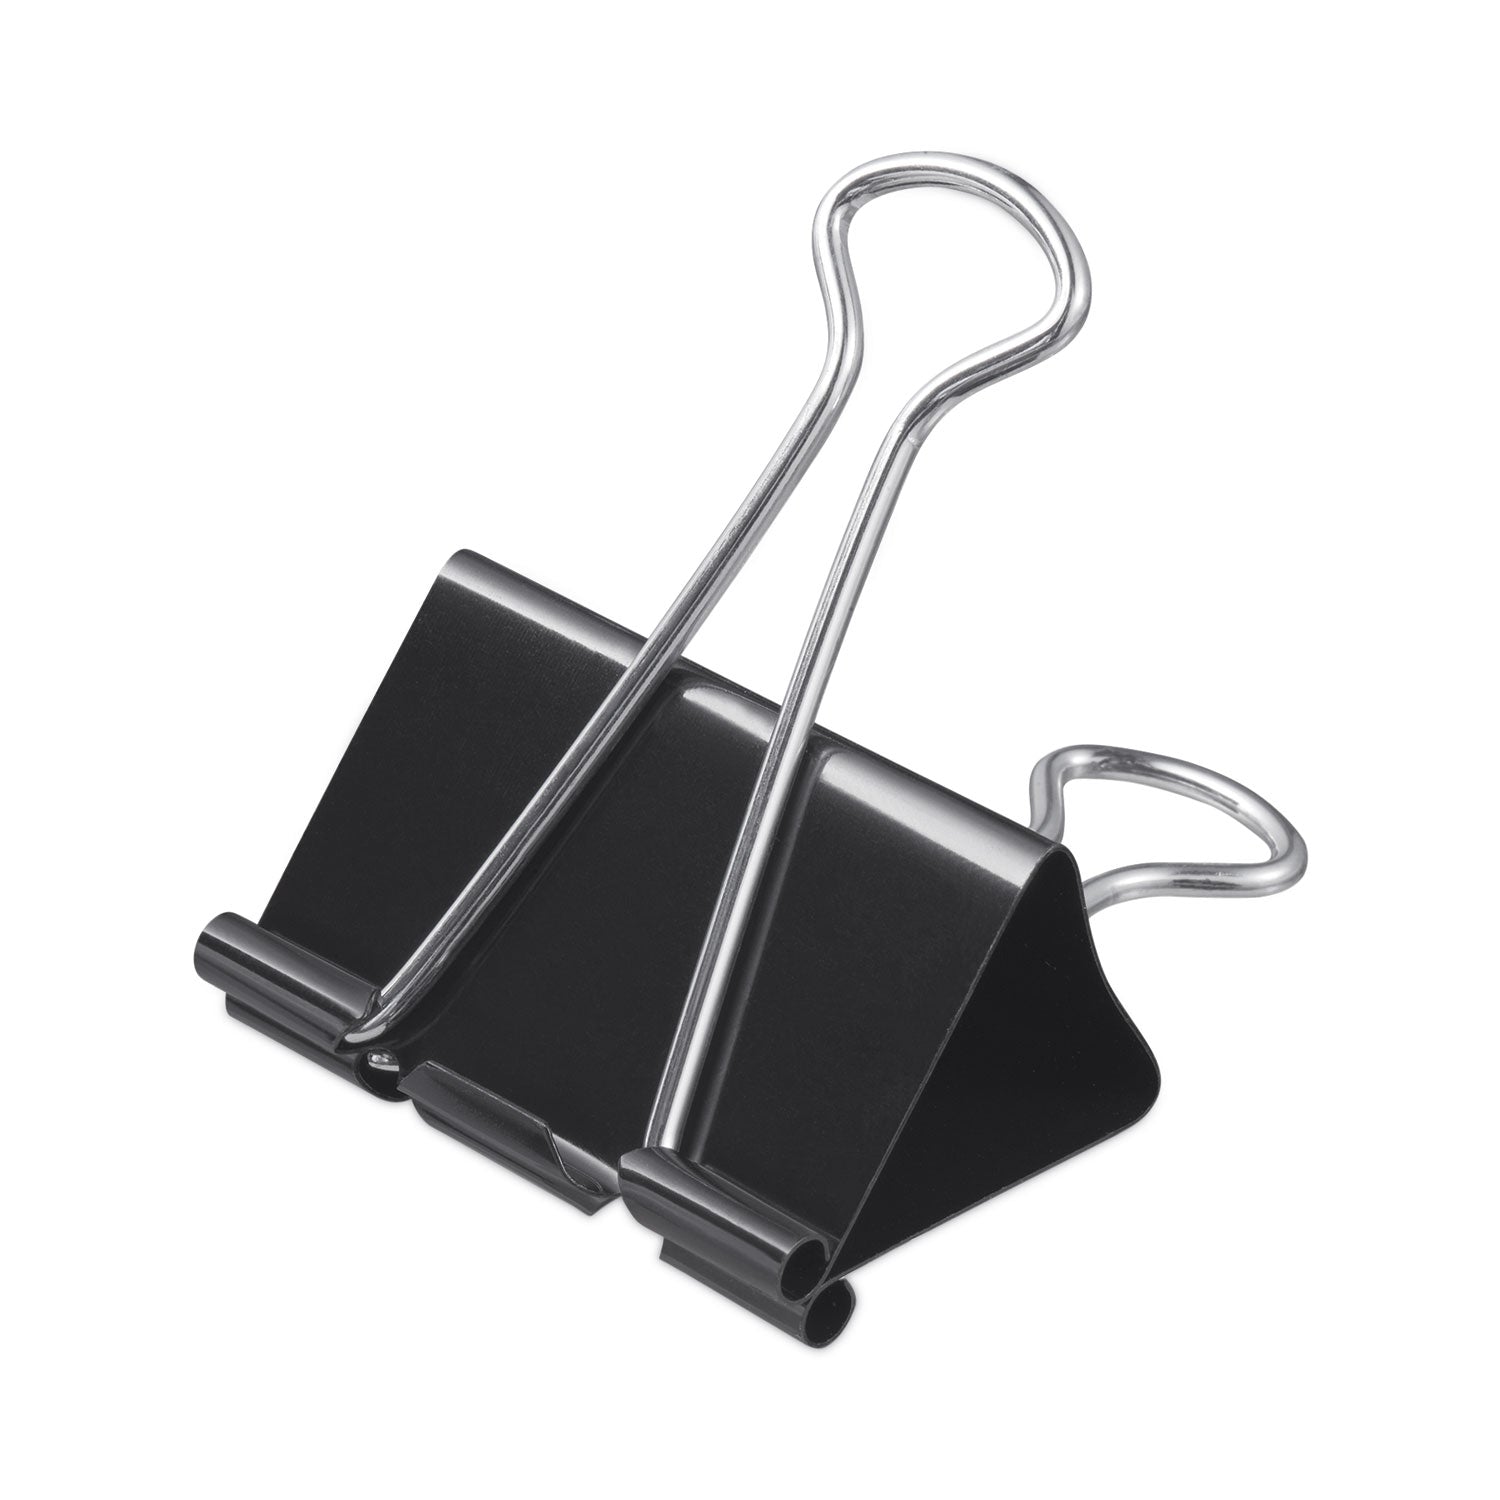 binder-clips-with-storage-tub-large-black-silver-12-pack_unv11112 - 1